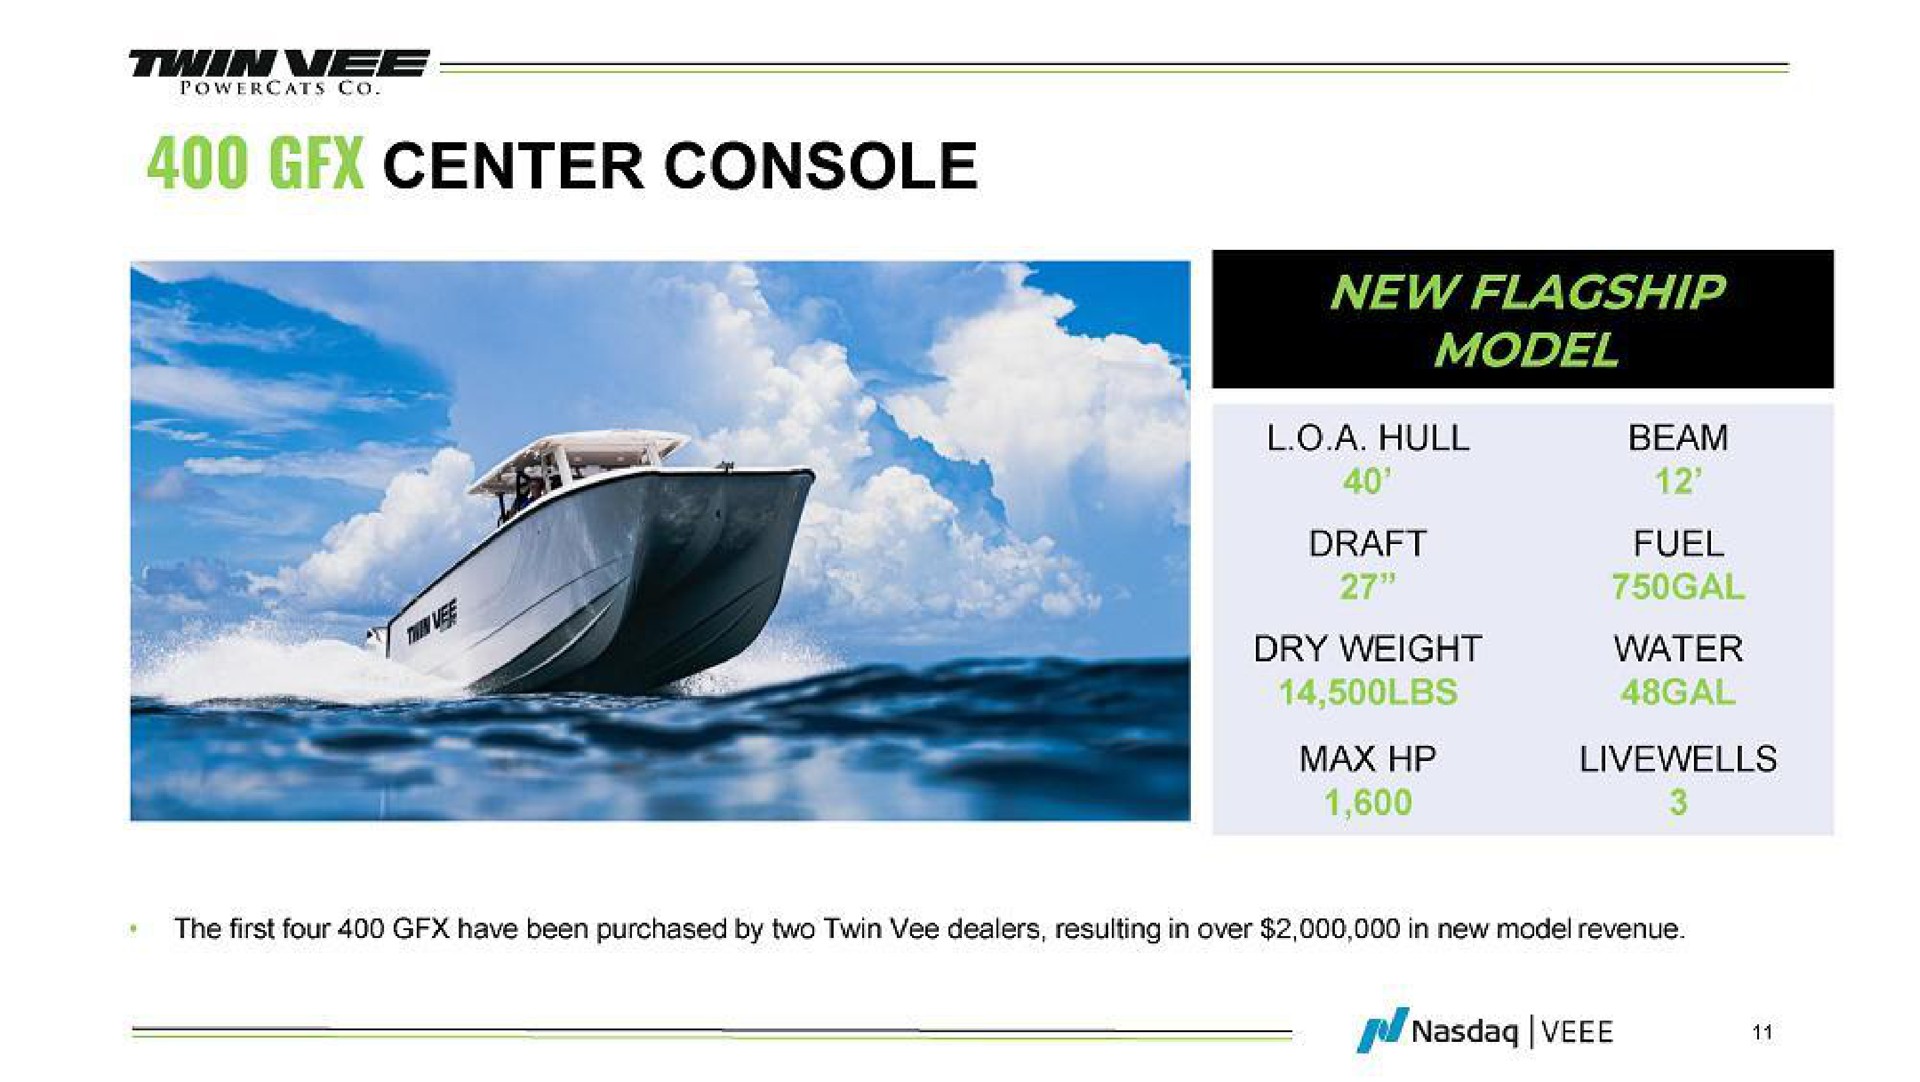 center console new flagship | Twin Vee PowerCats